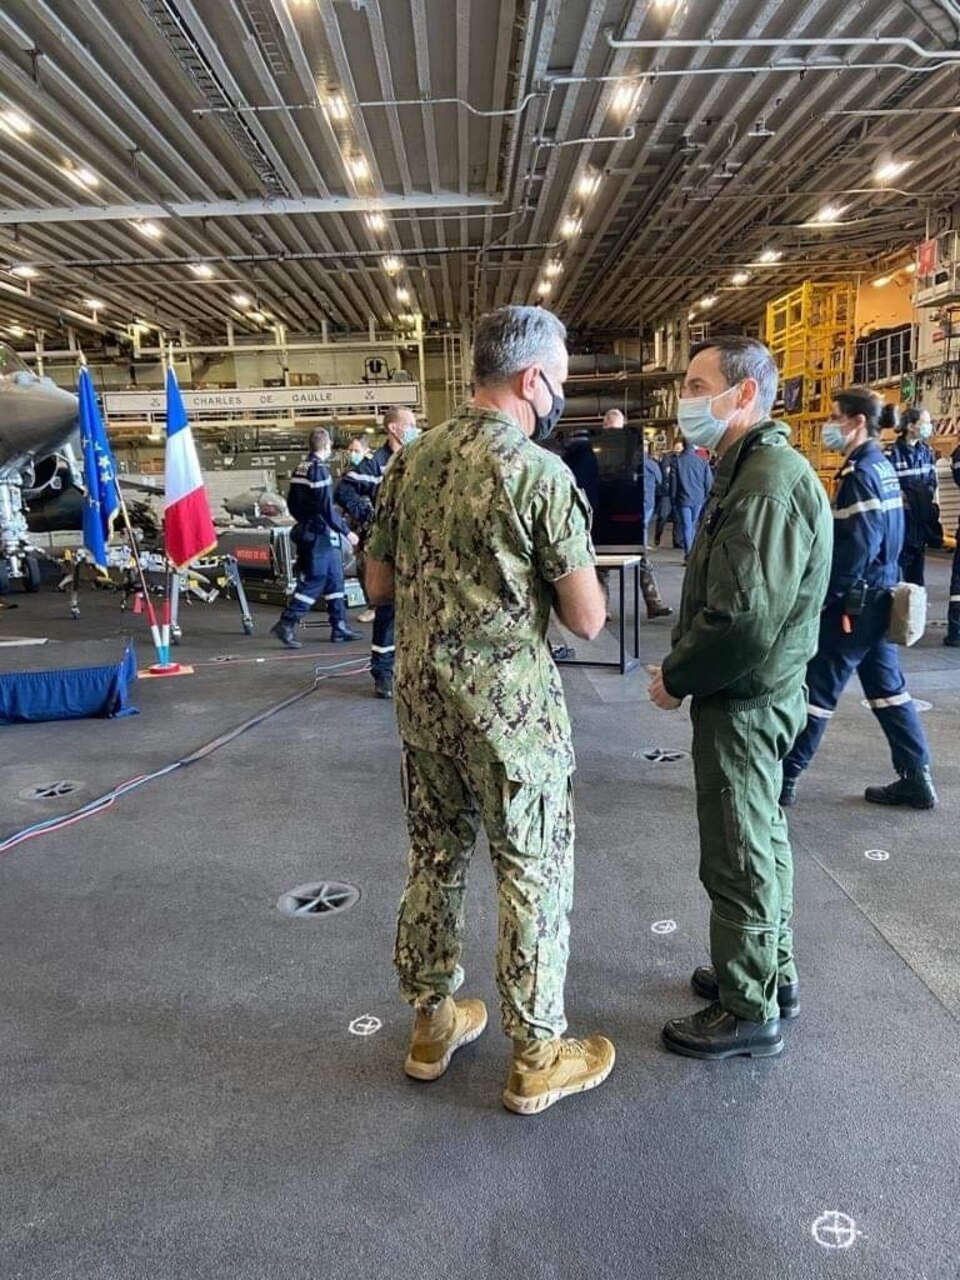 Adm. Robert Burke, Commander, U.S. Naval Forces Europe-Africa (NAVEUR-NAVAF) and Allied Joint Forces Command (JFC) Naples, visited the French aircraft carrier Charles de Gaulle (R 91) during the French exercise POLARIS 21, Dec. 2. 2021